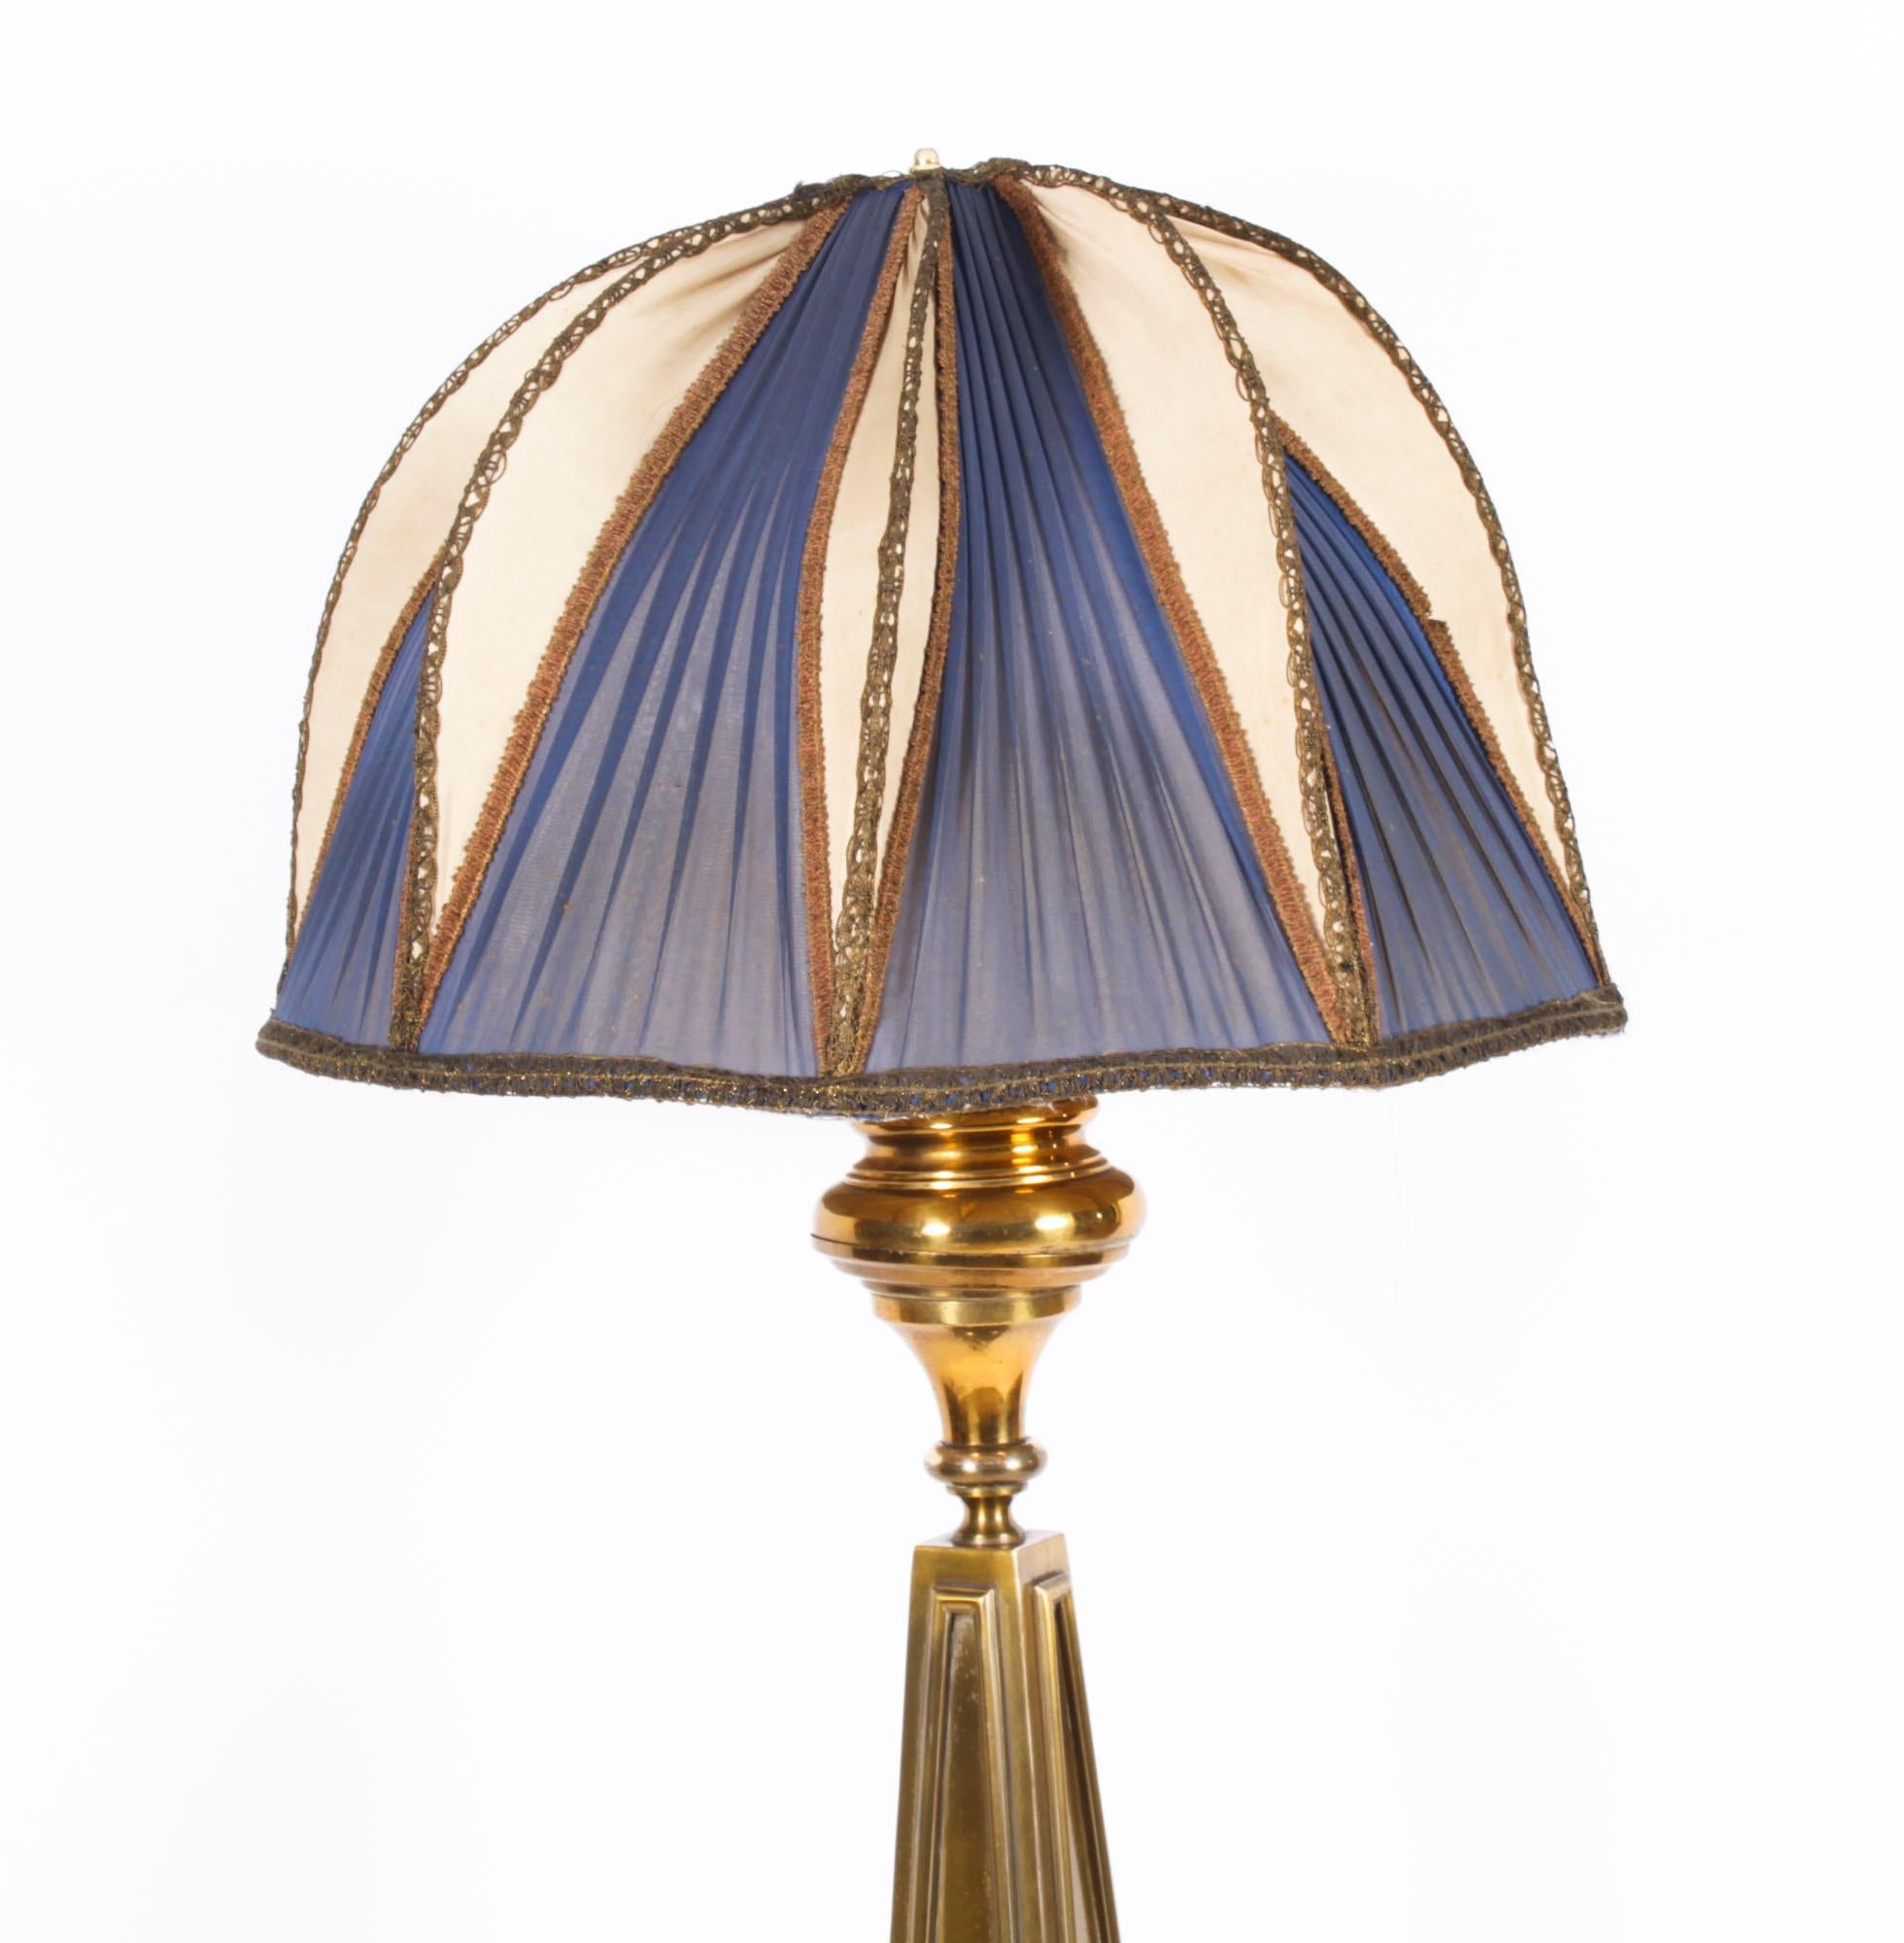 Antique French Art Deco Standard Lamp with Shade Circa 1920 In Good Condition For Sale In London, GB